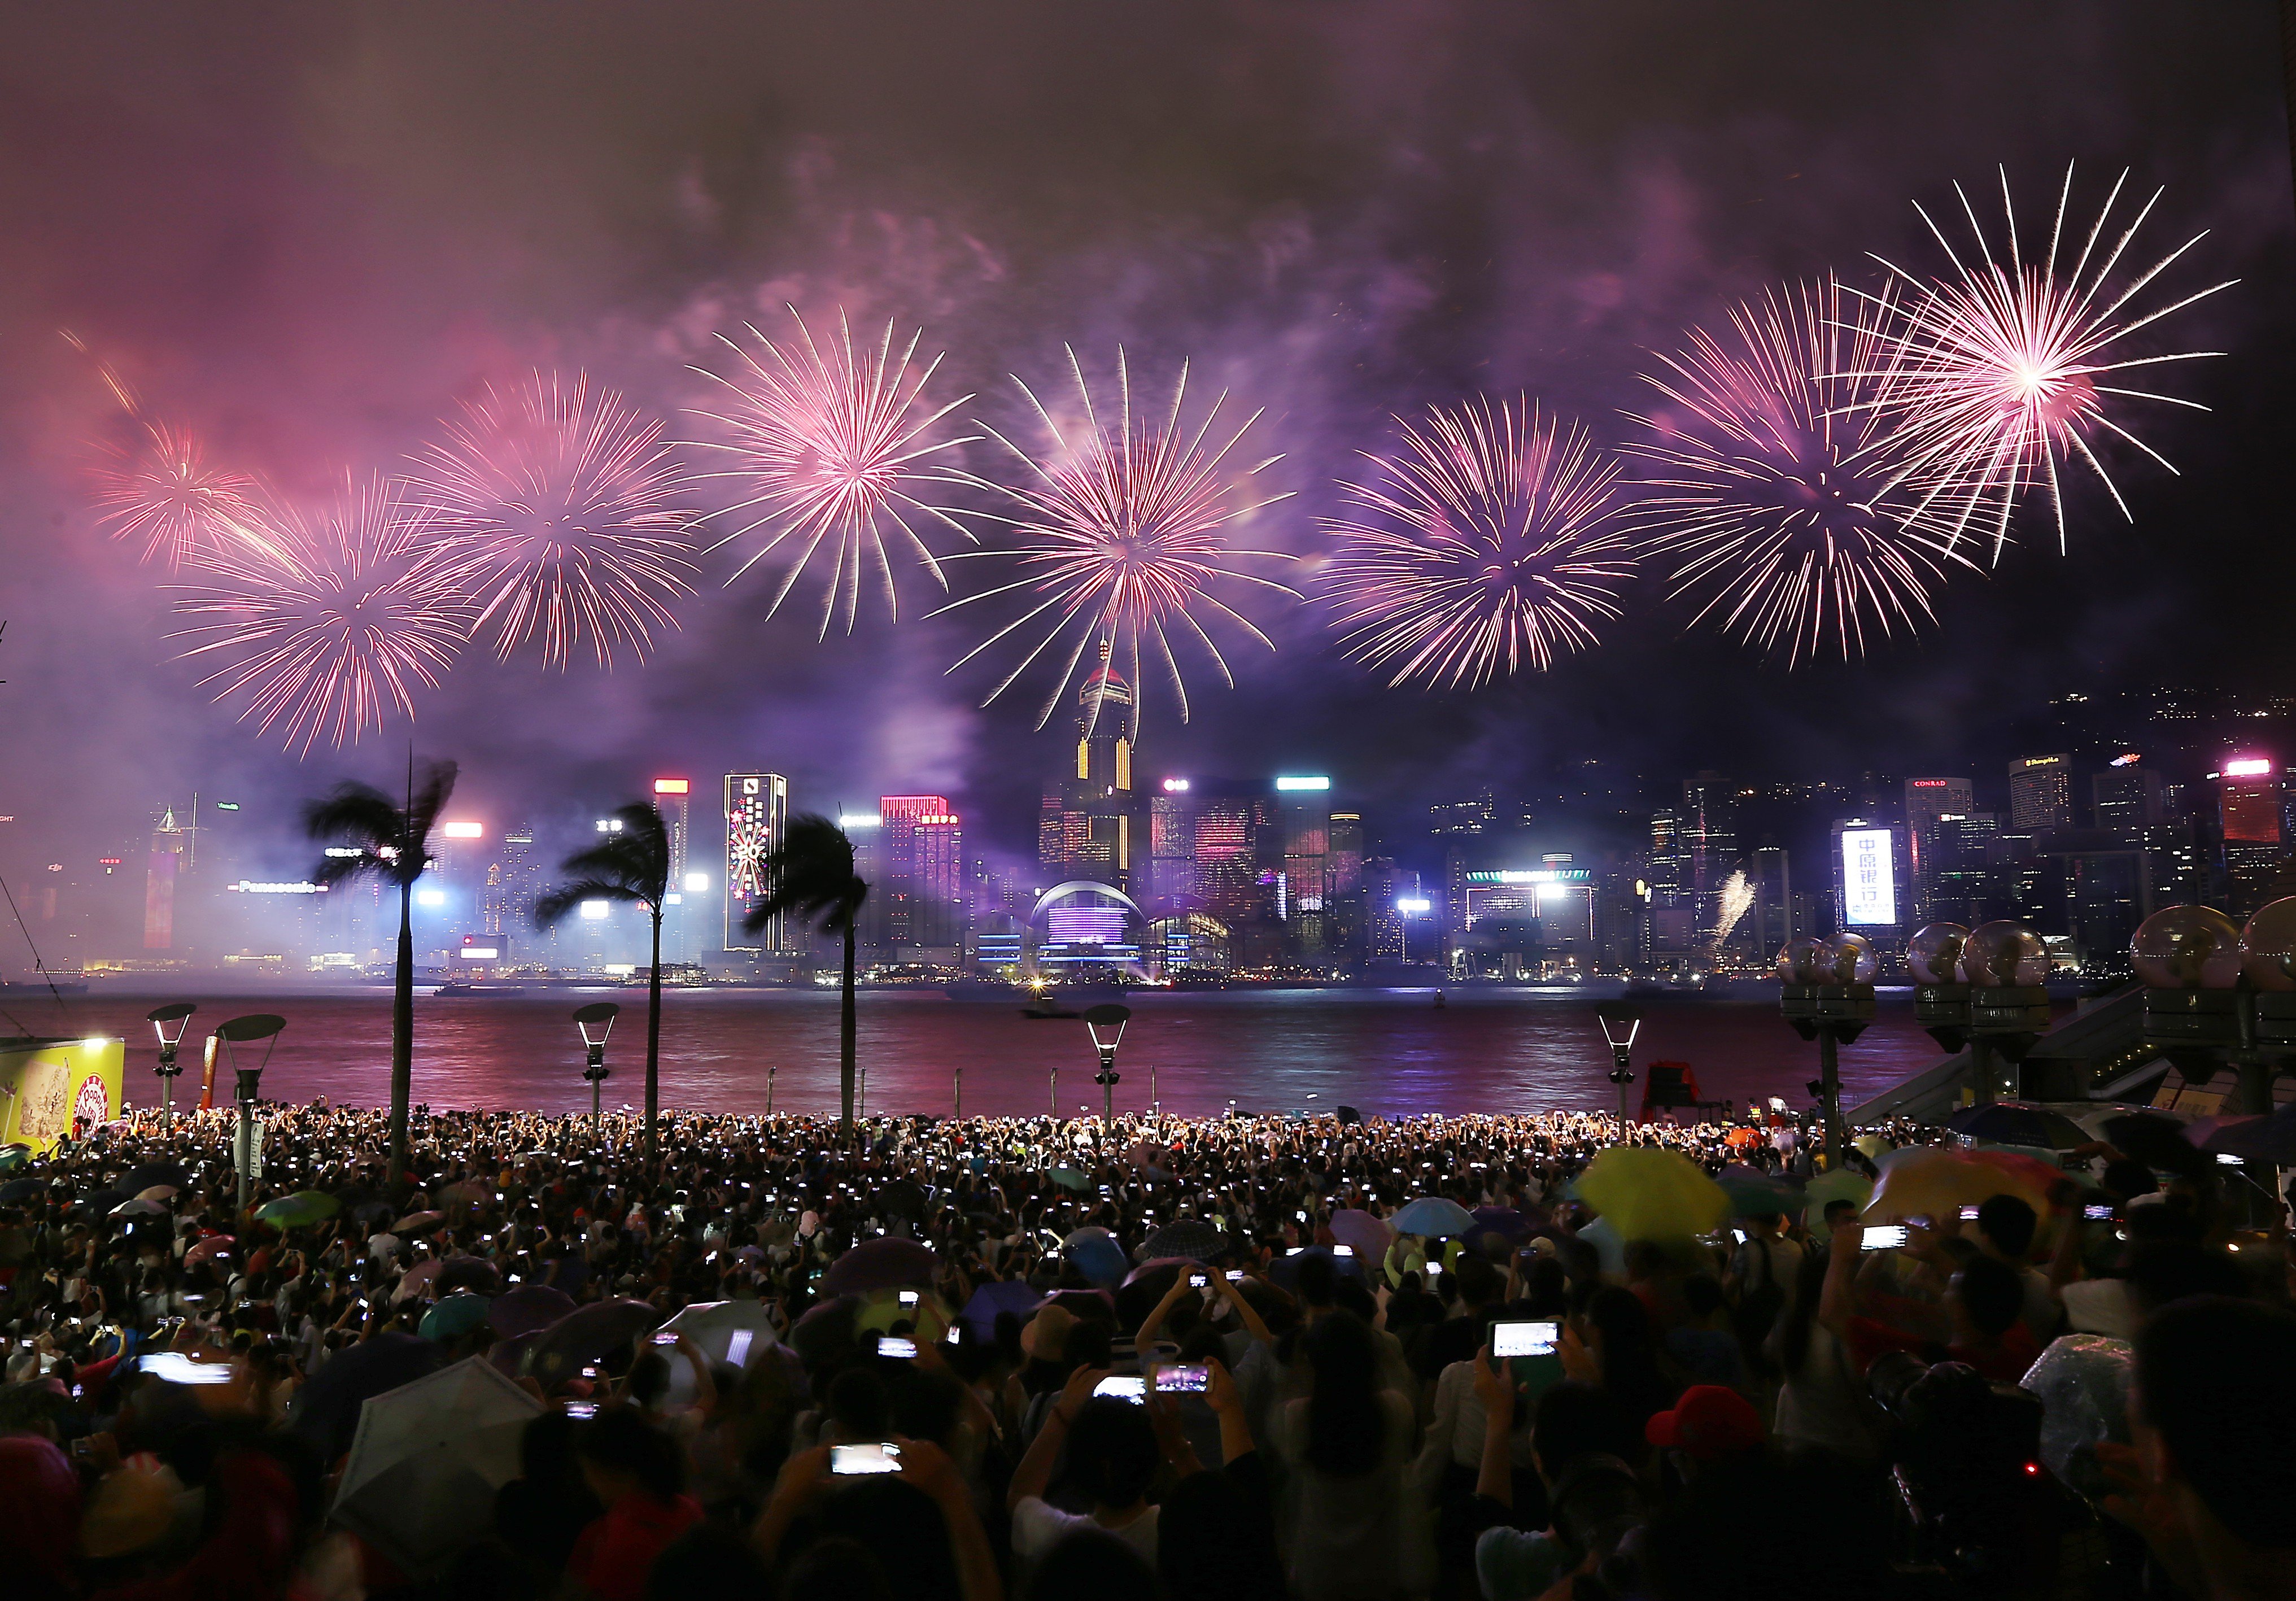 Police estimate crowd of 263,000 came to view 23-minute extravaganza costing HK$12 million